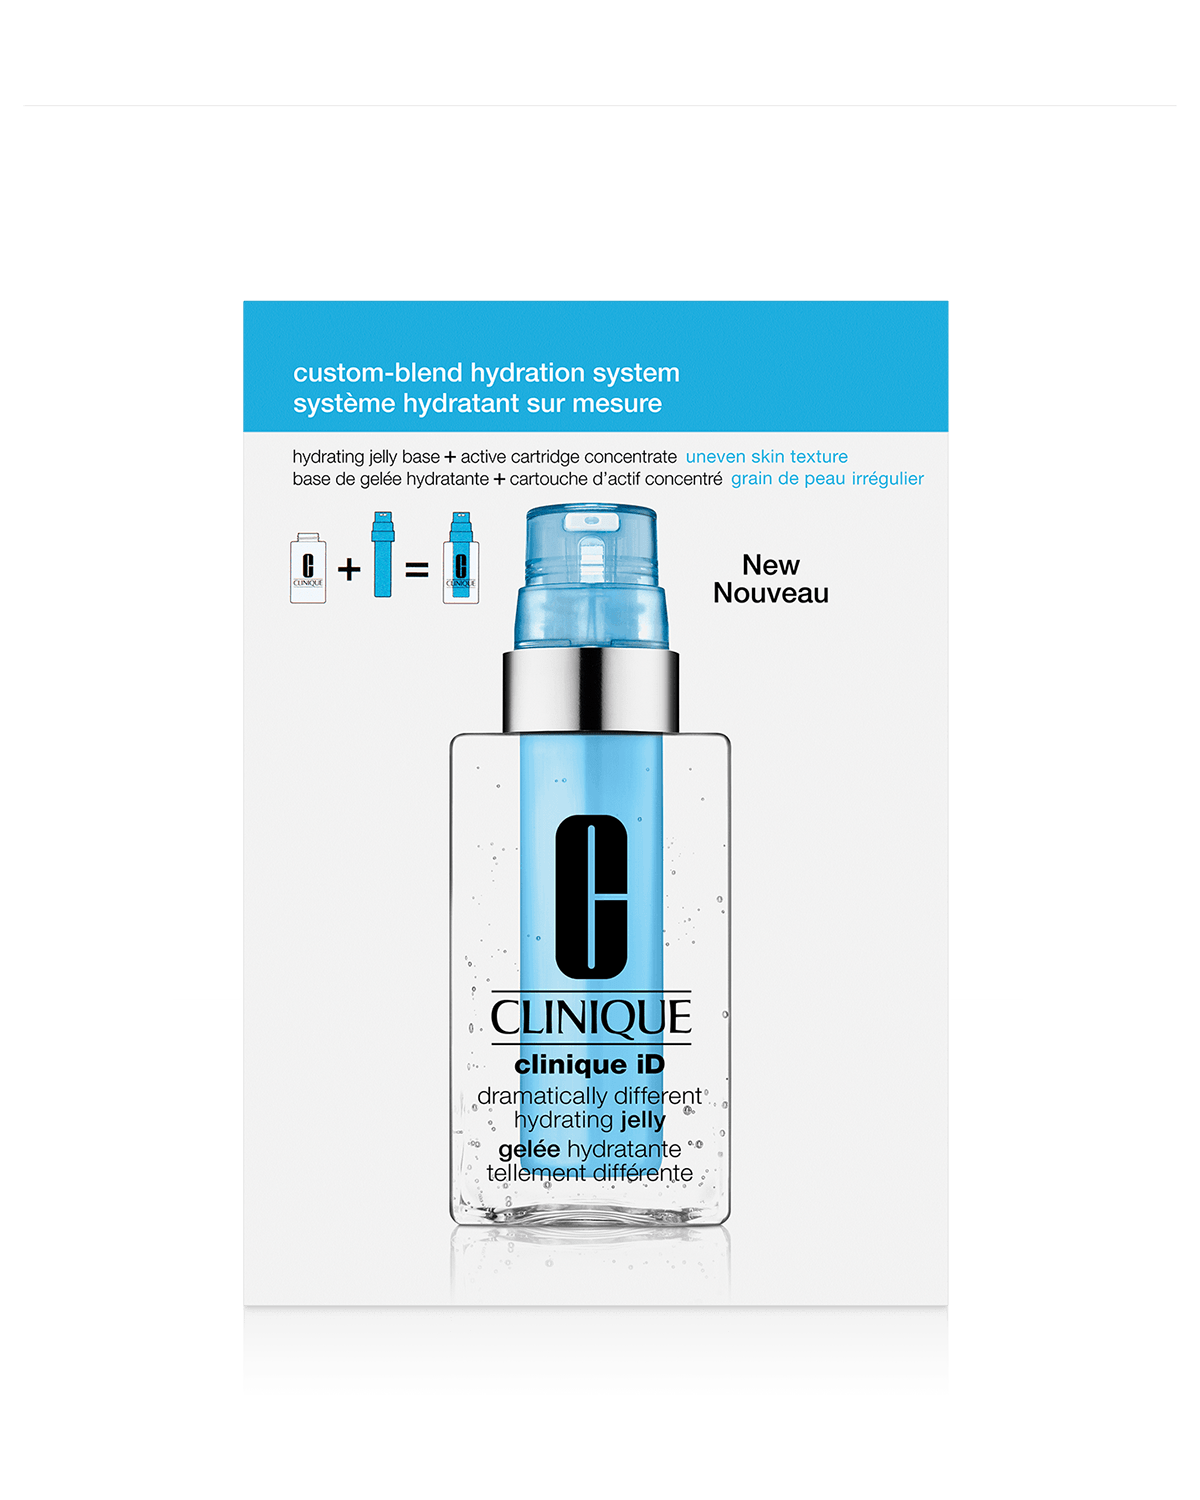 Clinique iD™: Dramatically Different™ Hydrating Jelly + Pores & Uneven Texture Packette